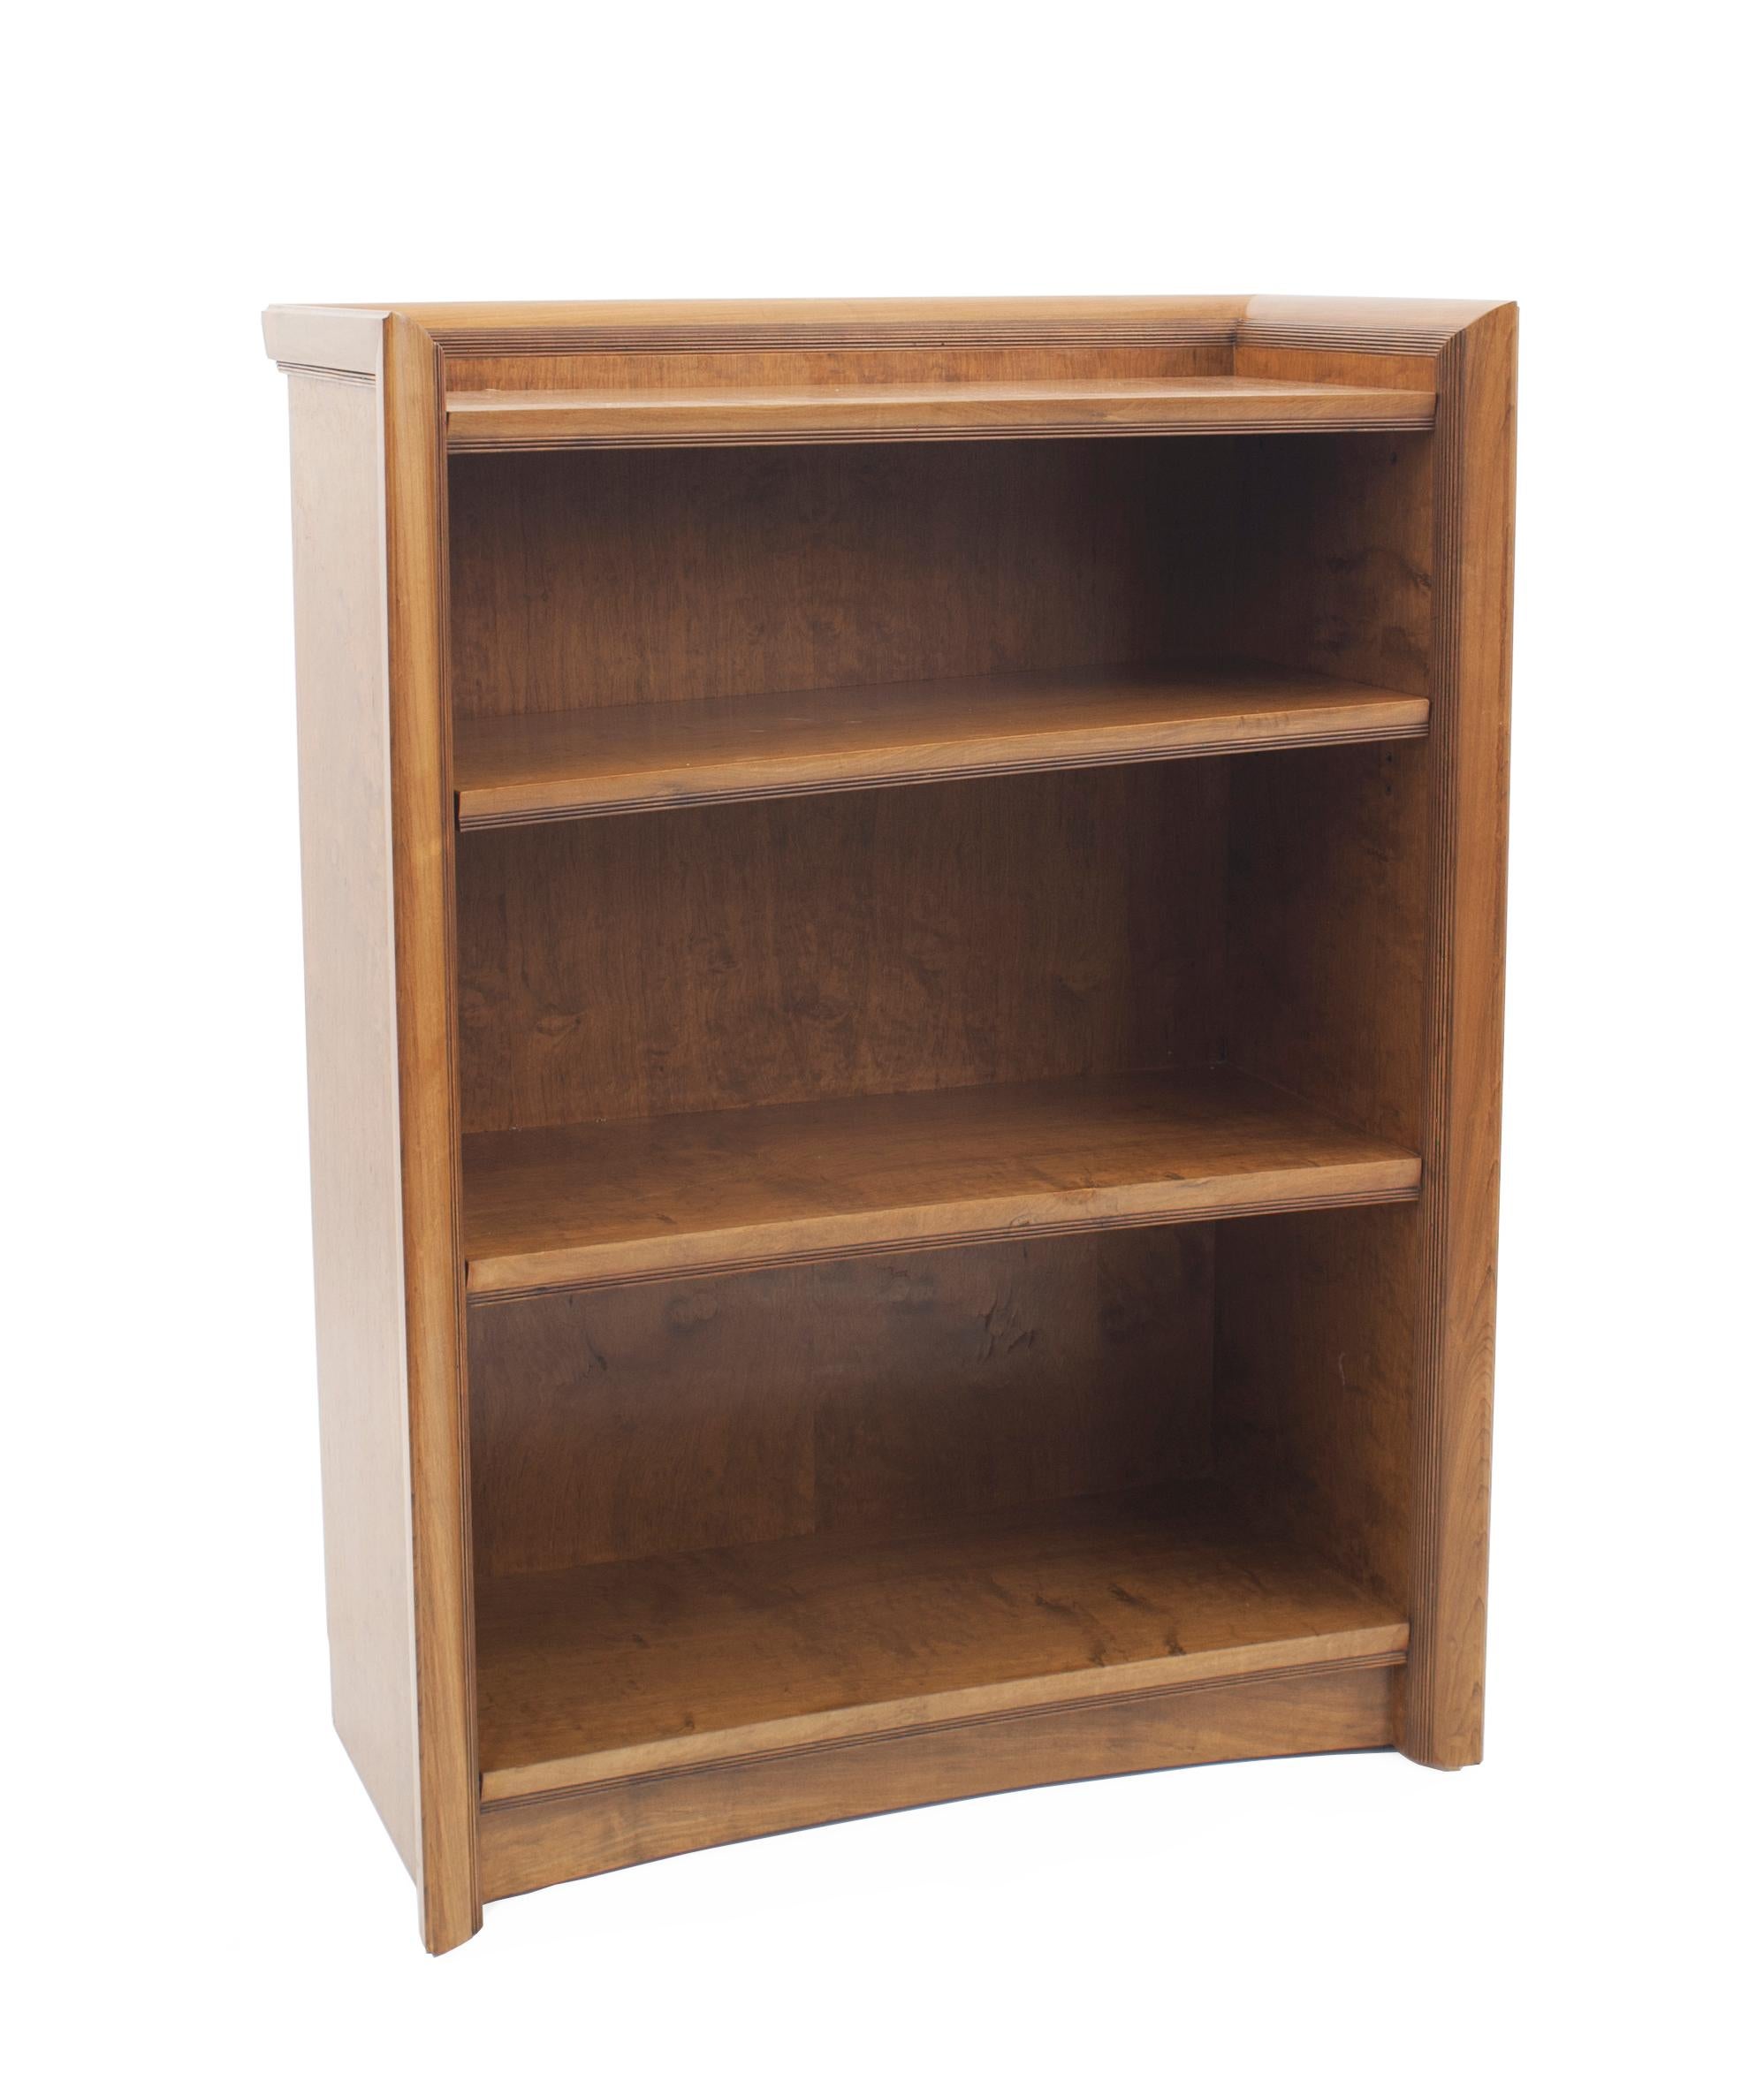 Pair of American Mid-Century (1950s) maple bookcase cabinets having a low backrail with 3 open shelves and fluted trim
